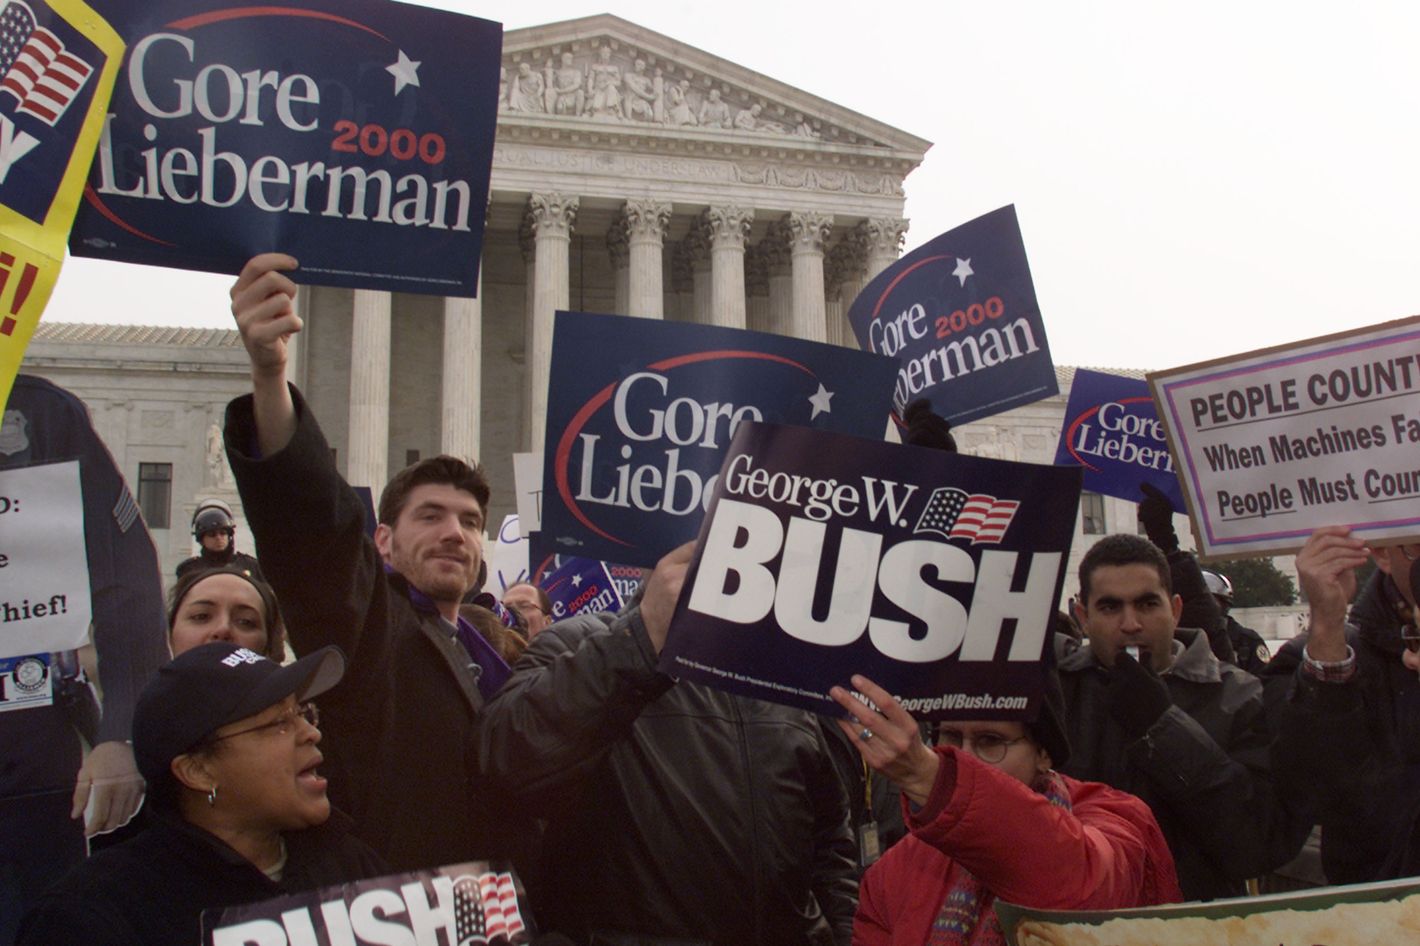 Yes, Bush v. Gore Did Steal the Election